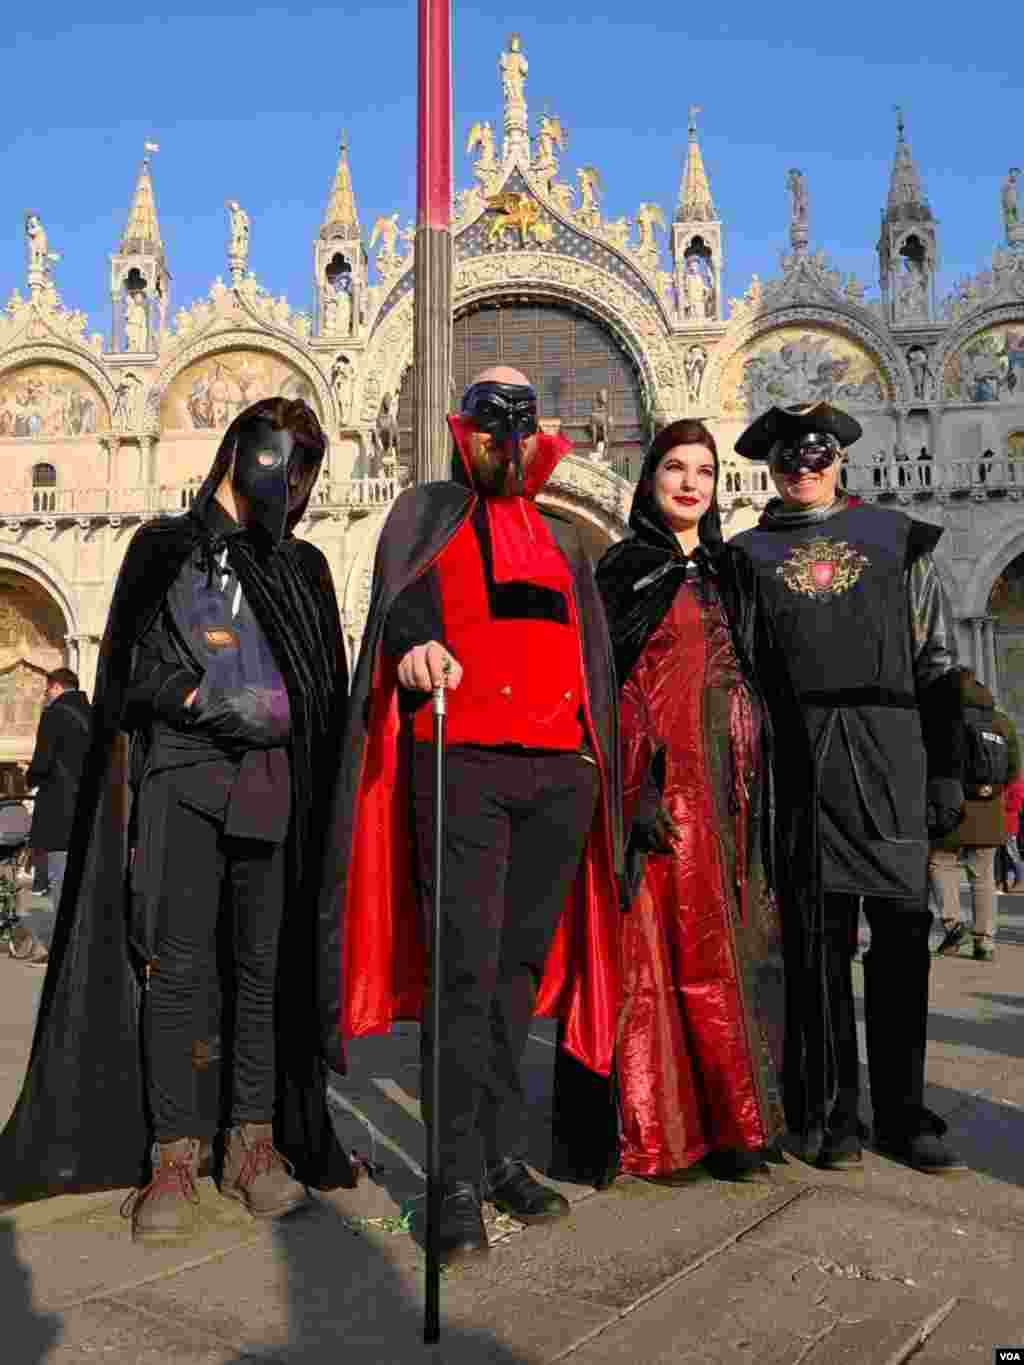 People pose in front of Saint Mark’s Basilica on opening day of the Venice Carnival, in Venice, Italy, Feb. 8, 2020.